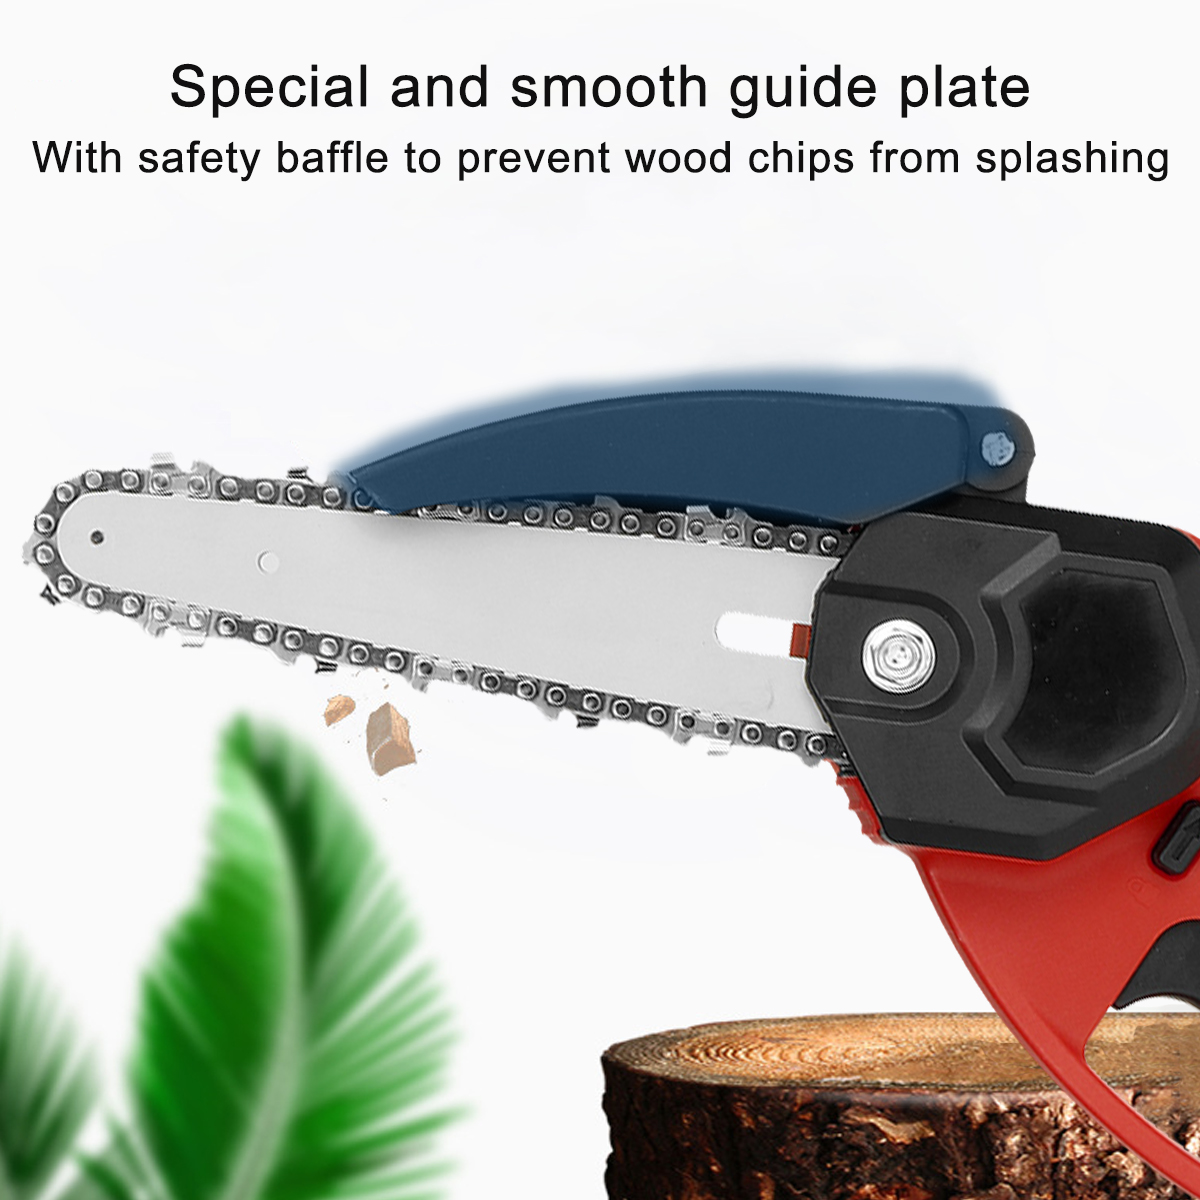 Handheld-Mini-Rechargable-Chainsaw-6-Electric-Chain-Saws-Stepless-Speed-Change-Wood-Work-Cutter-W-Ba-1837413-6